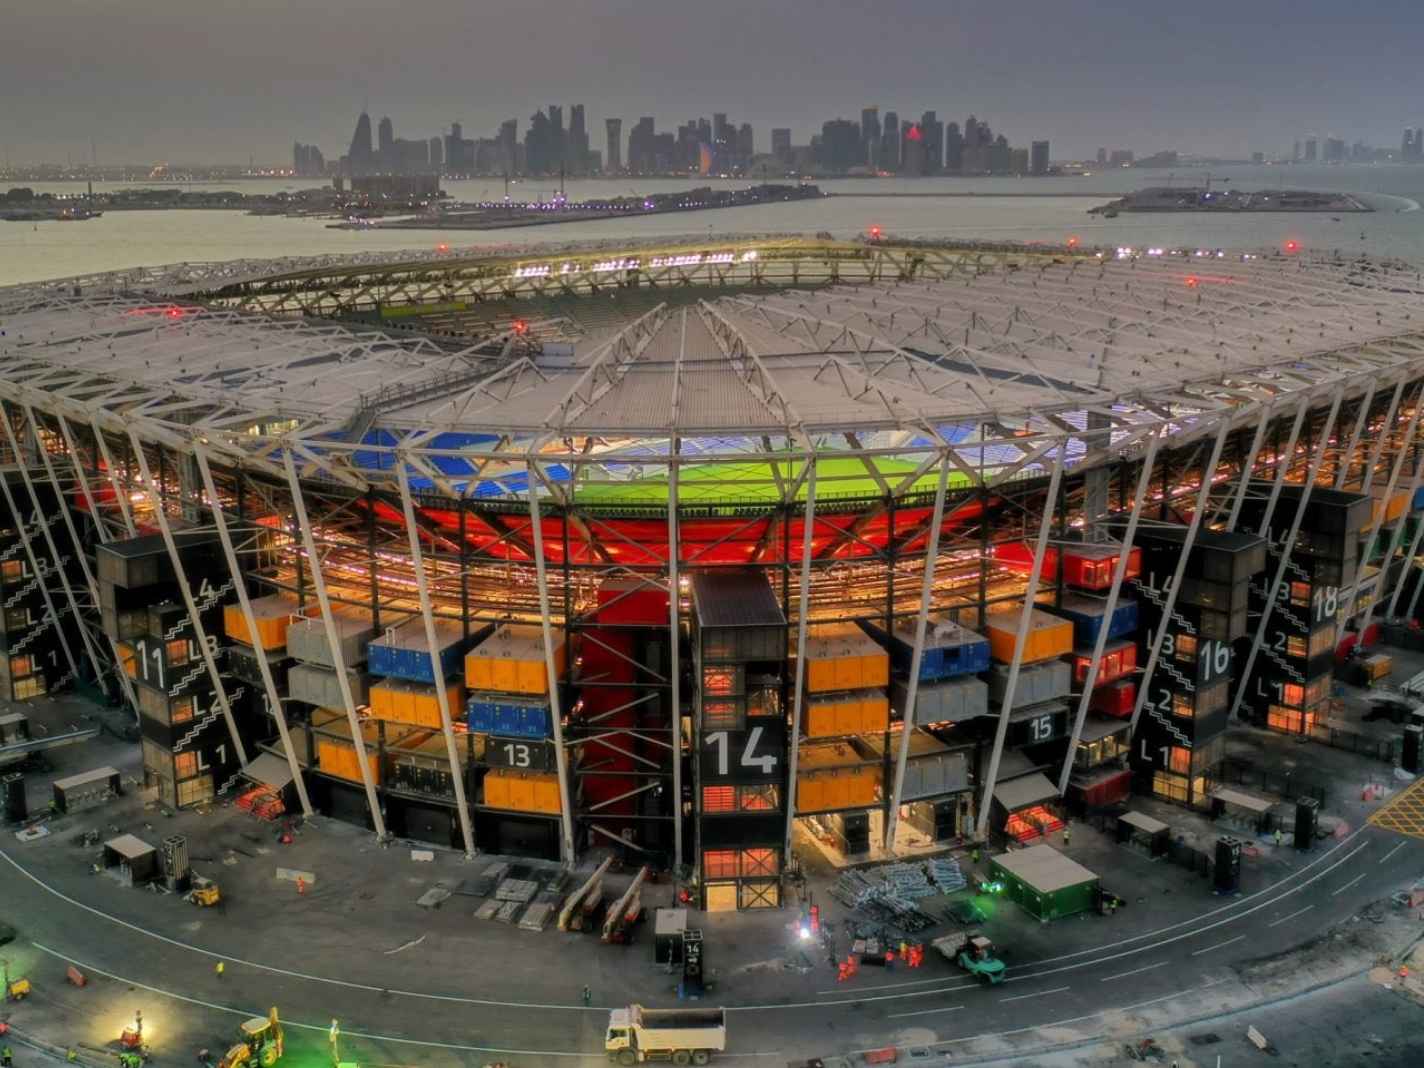 Stadium 974 in Qatar is the world's first transportable football arena